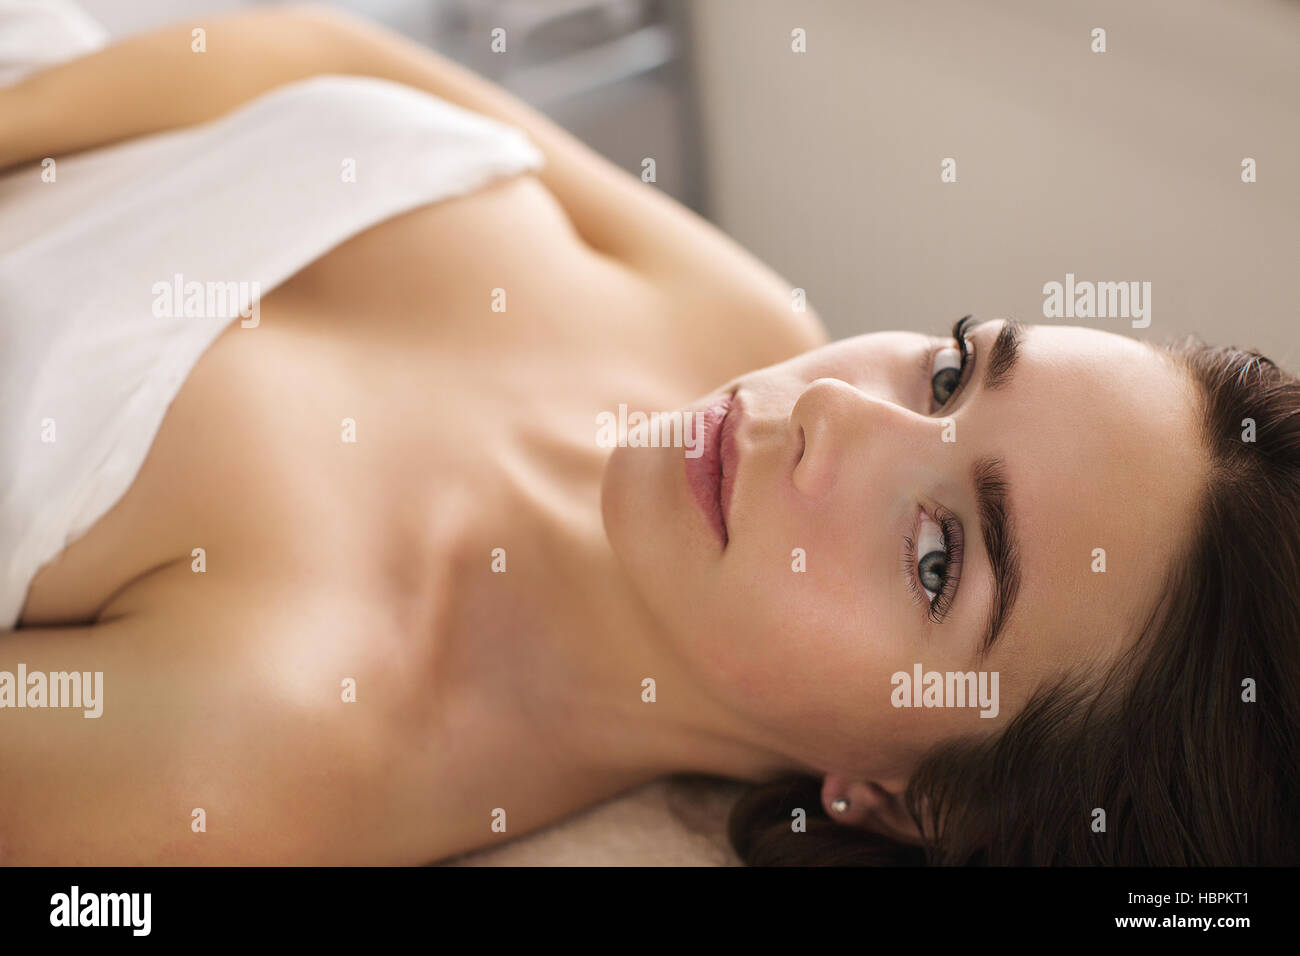 Woman is waiting for skin care treatment Stock Photo